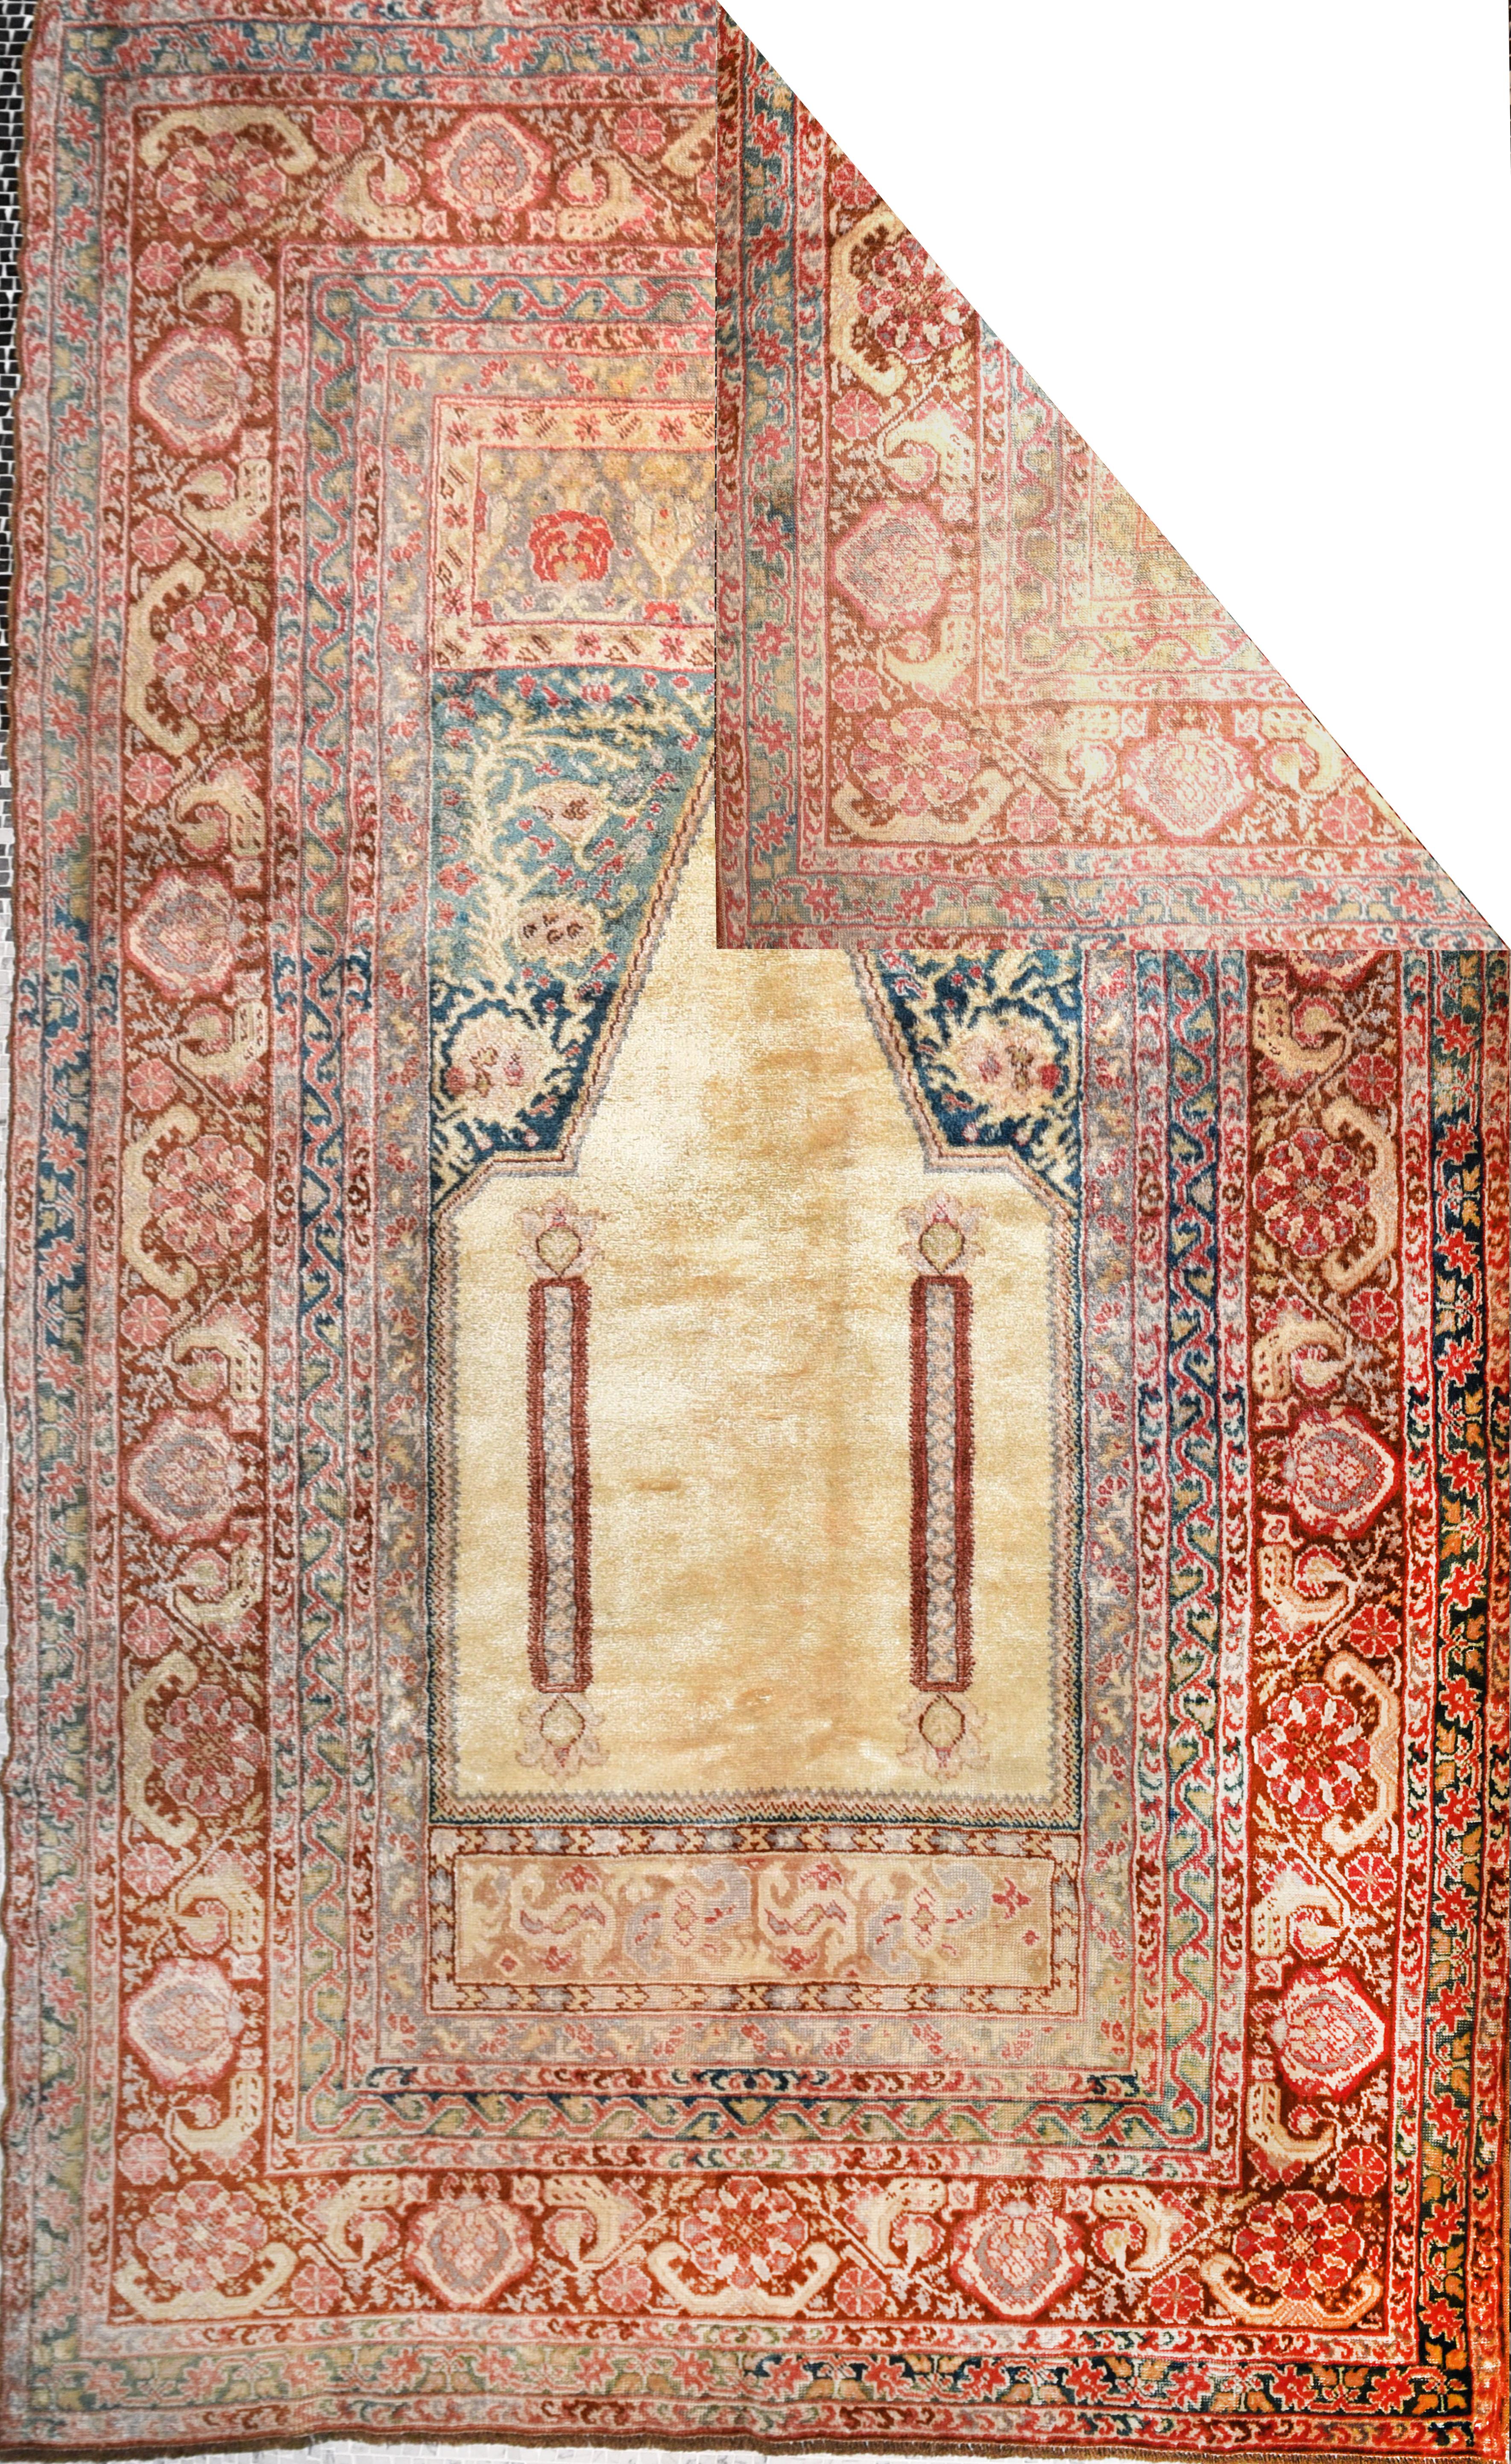 Fine antique Turkish rug angora Moher wool, hand knotted, circa 1890

Design: Directional

Oushak rugs originated in the small town of Oushak in west-central Anatolia, today just south of Istanbul, Turkey. Unlike most Turkish rugs, Oushak